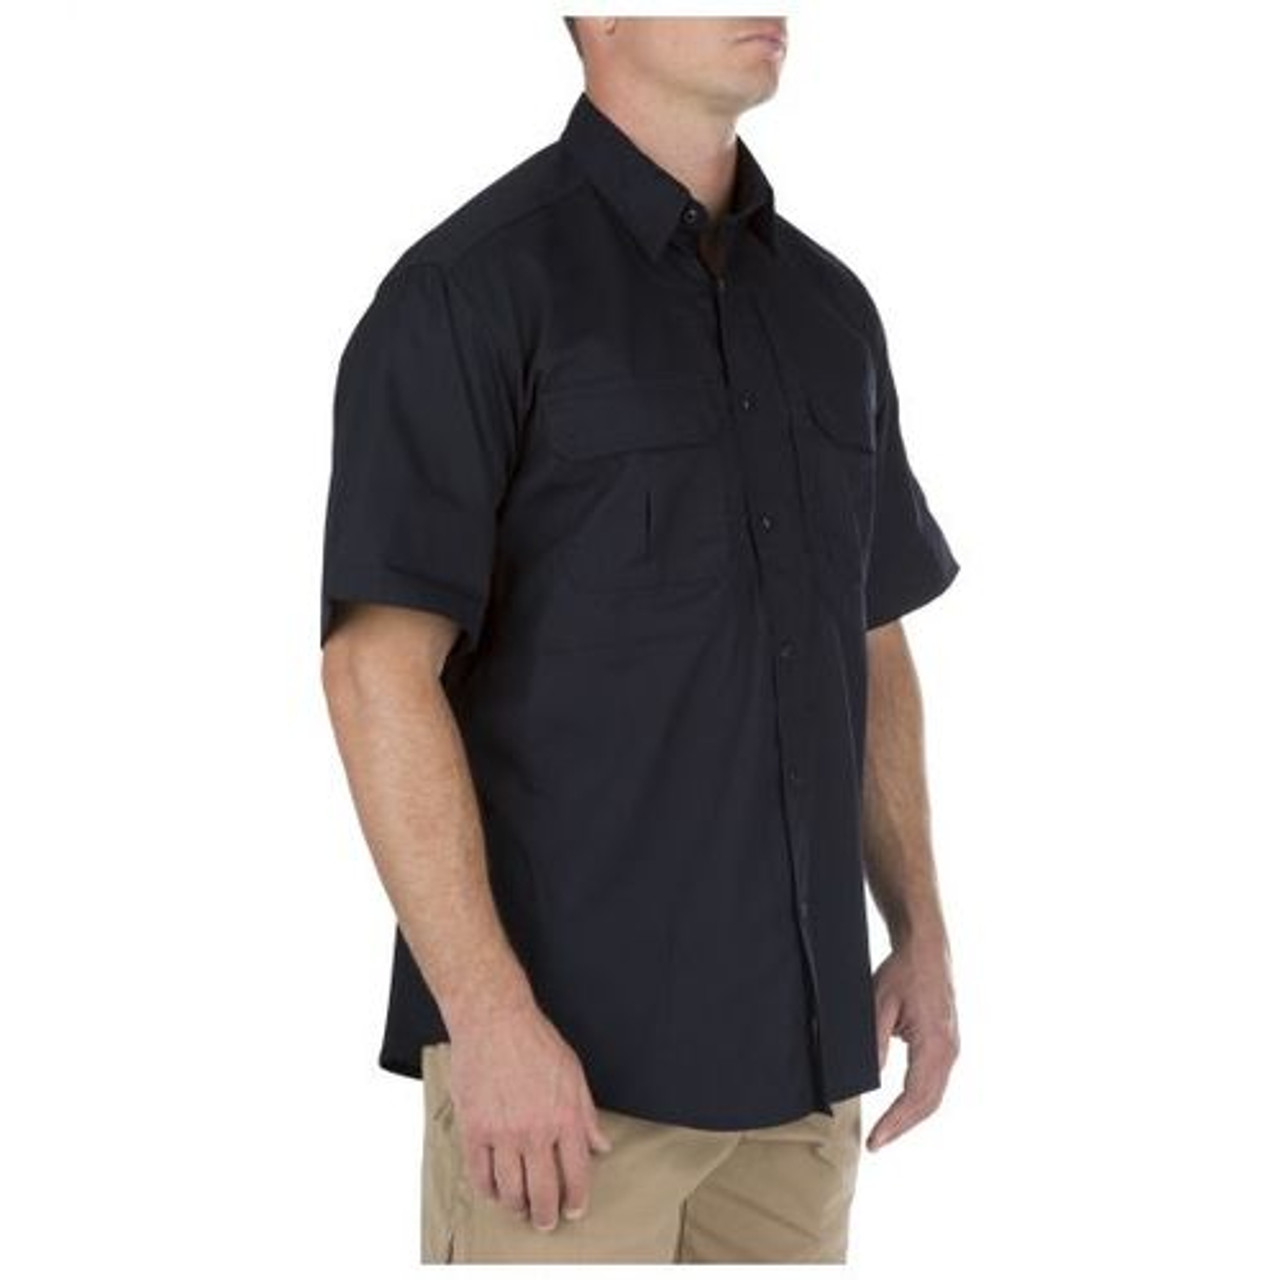 5.11 Tactical 71175 TacLite Pro Short Sleeve Casual Button-Down ...